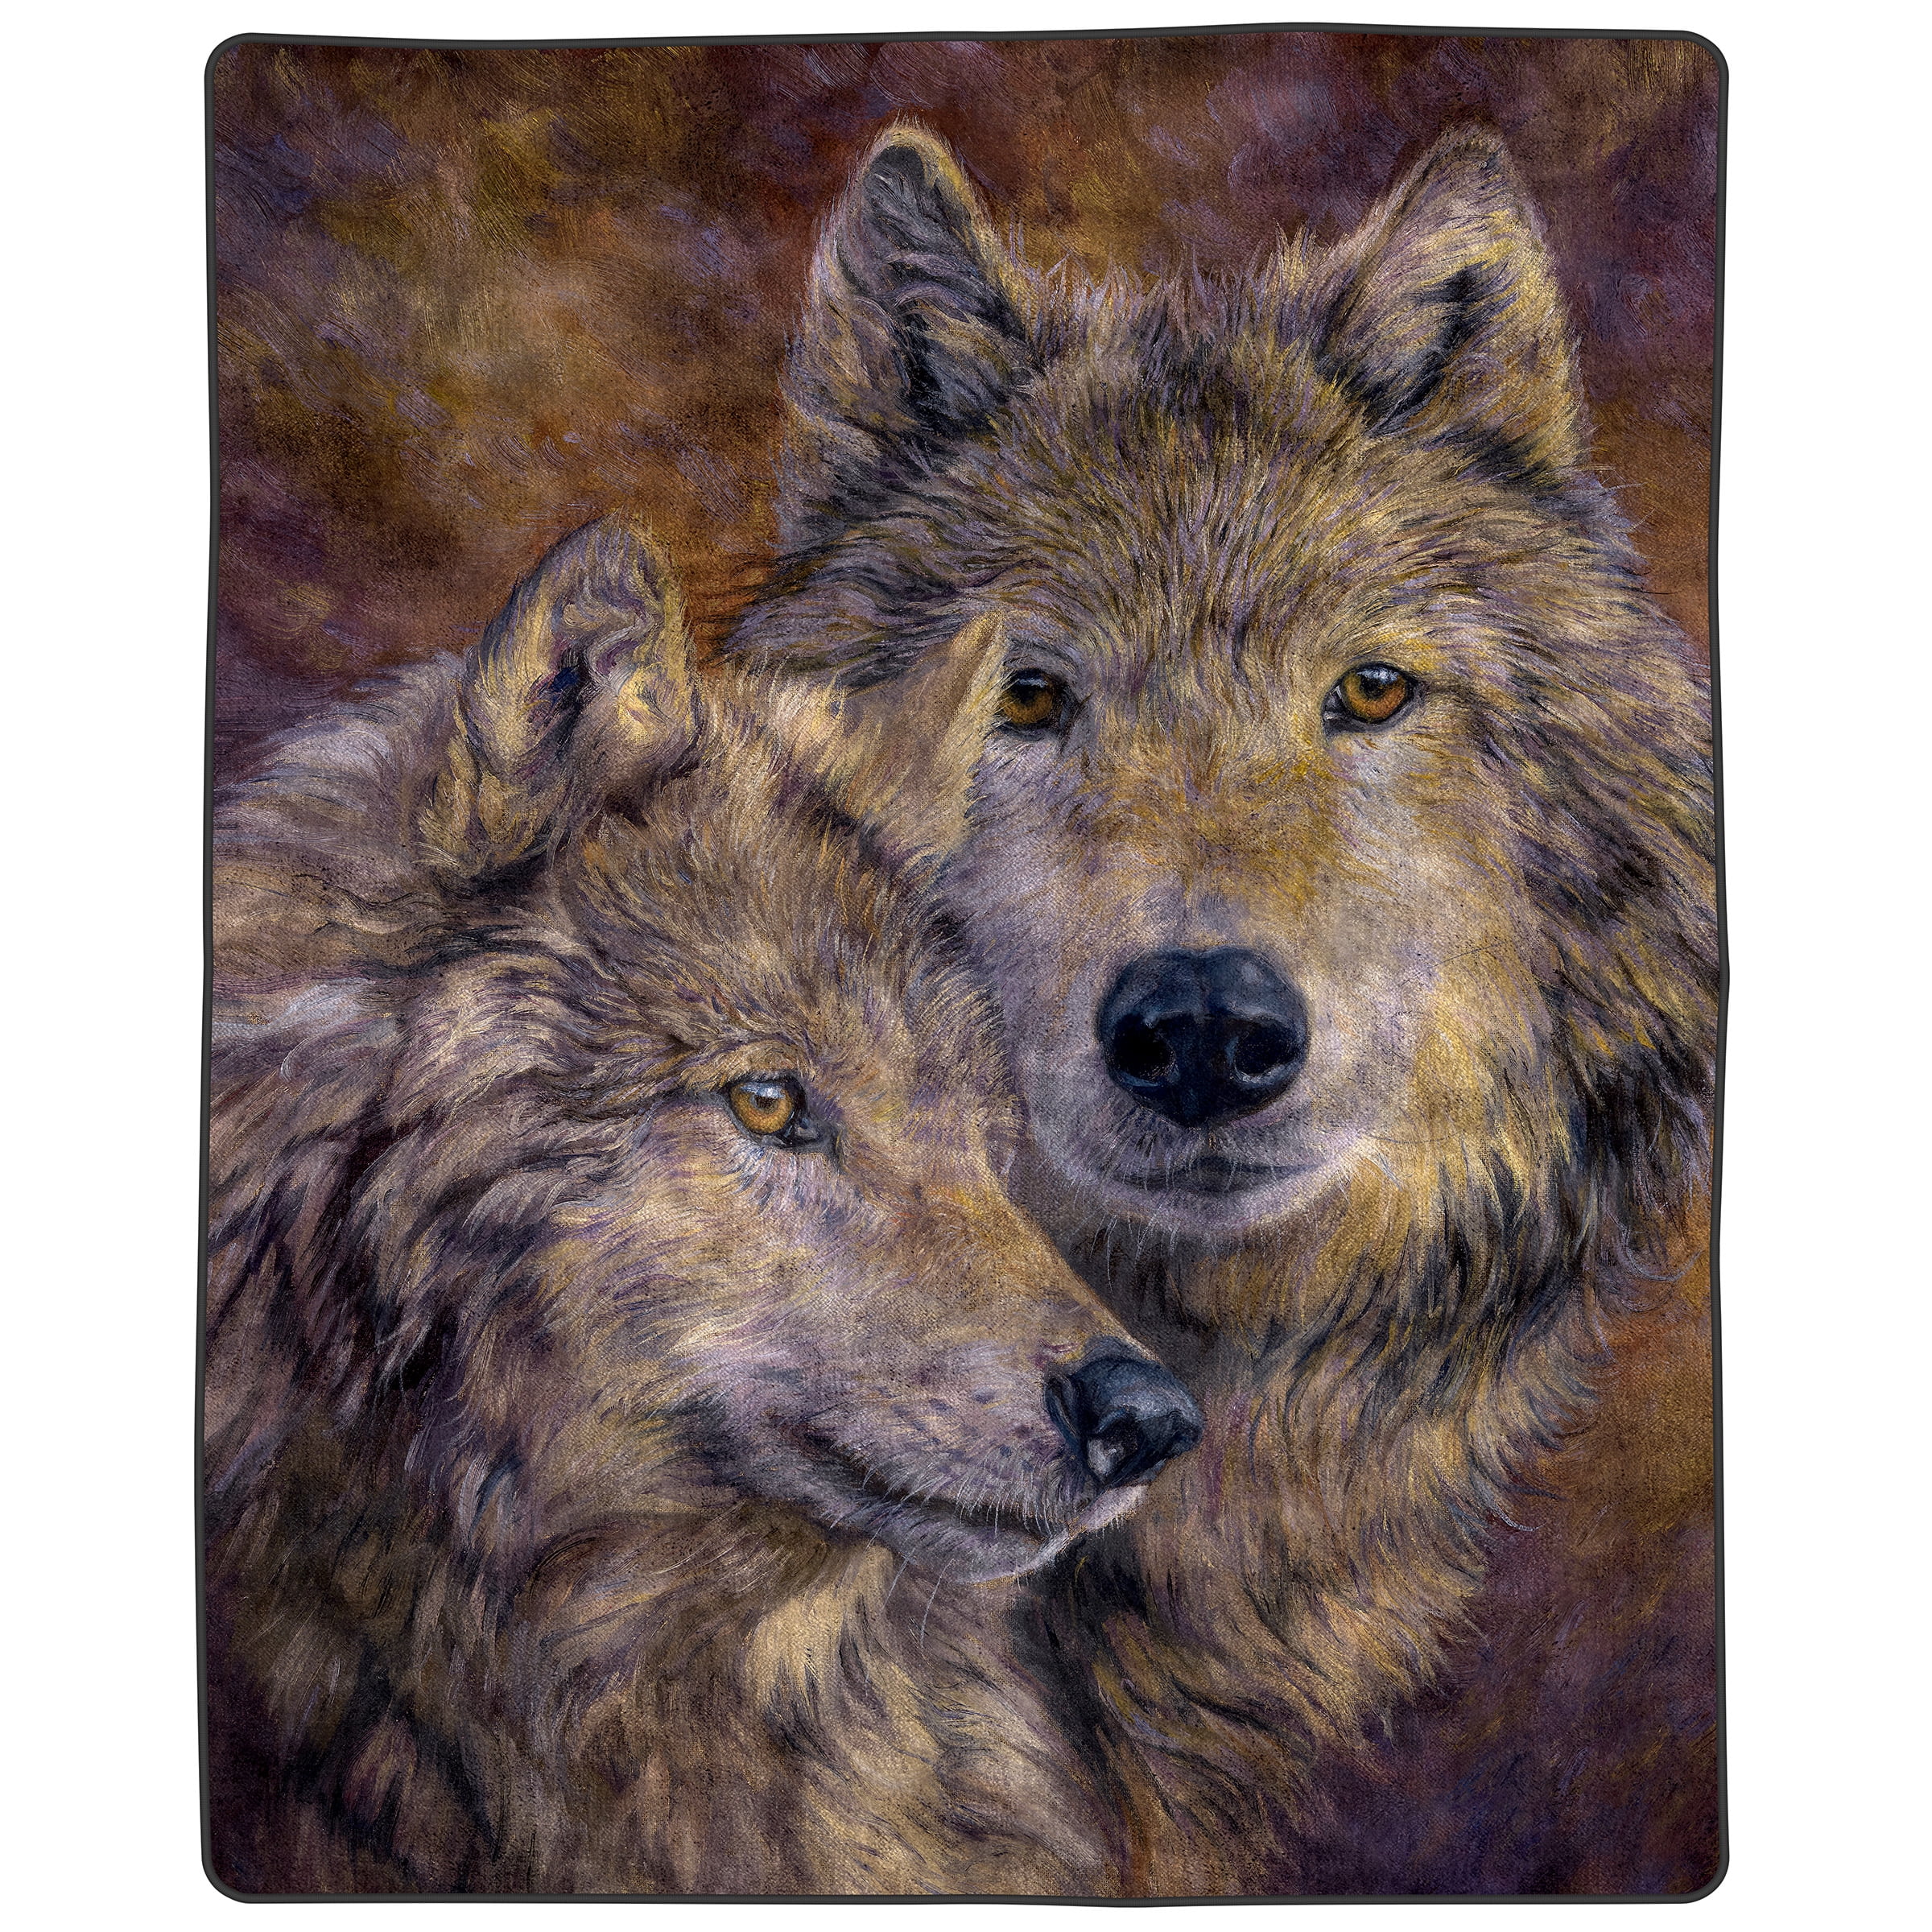 Details about   3D Cute Wolf NAO056 Warm Plush Fleece Blanket Picnic Sofa Couch Quilt Bed Amy 